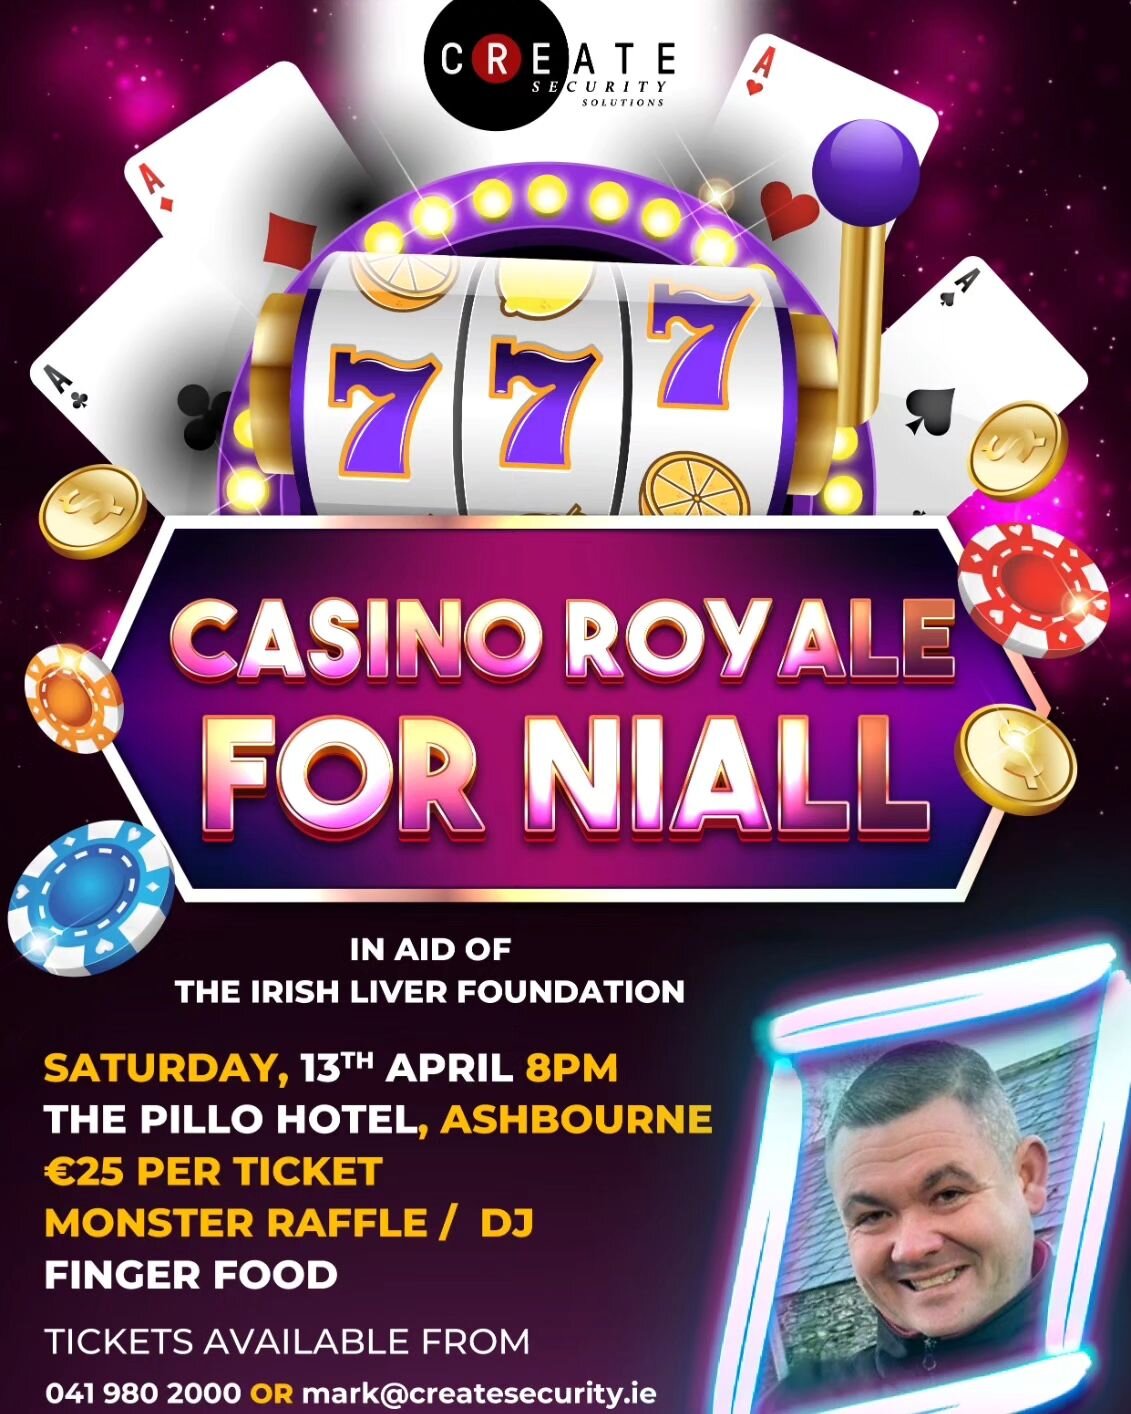 There is a very special group of people who are organising a very special fundraiser in memory of a very special person...

This fundraiser promises to be a night of lots of fun while remembering the wonderful Niall.

'Niall was an amazing person, a 